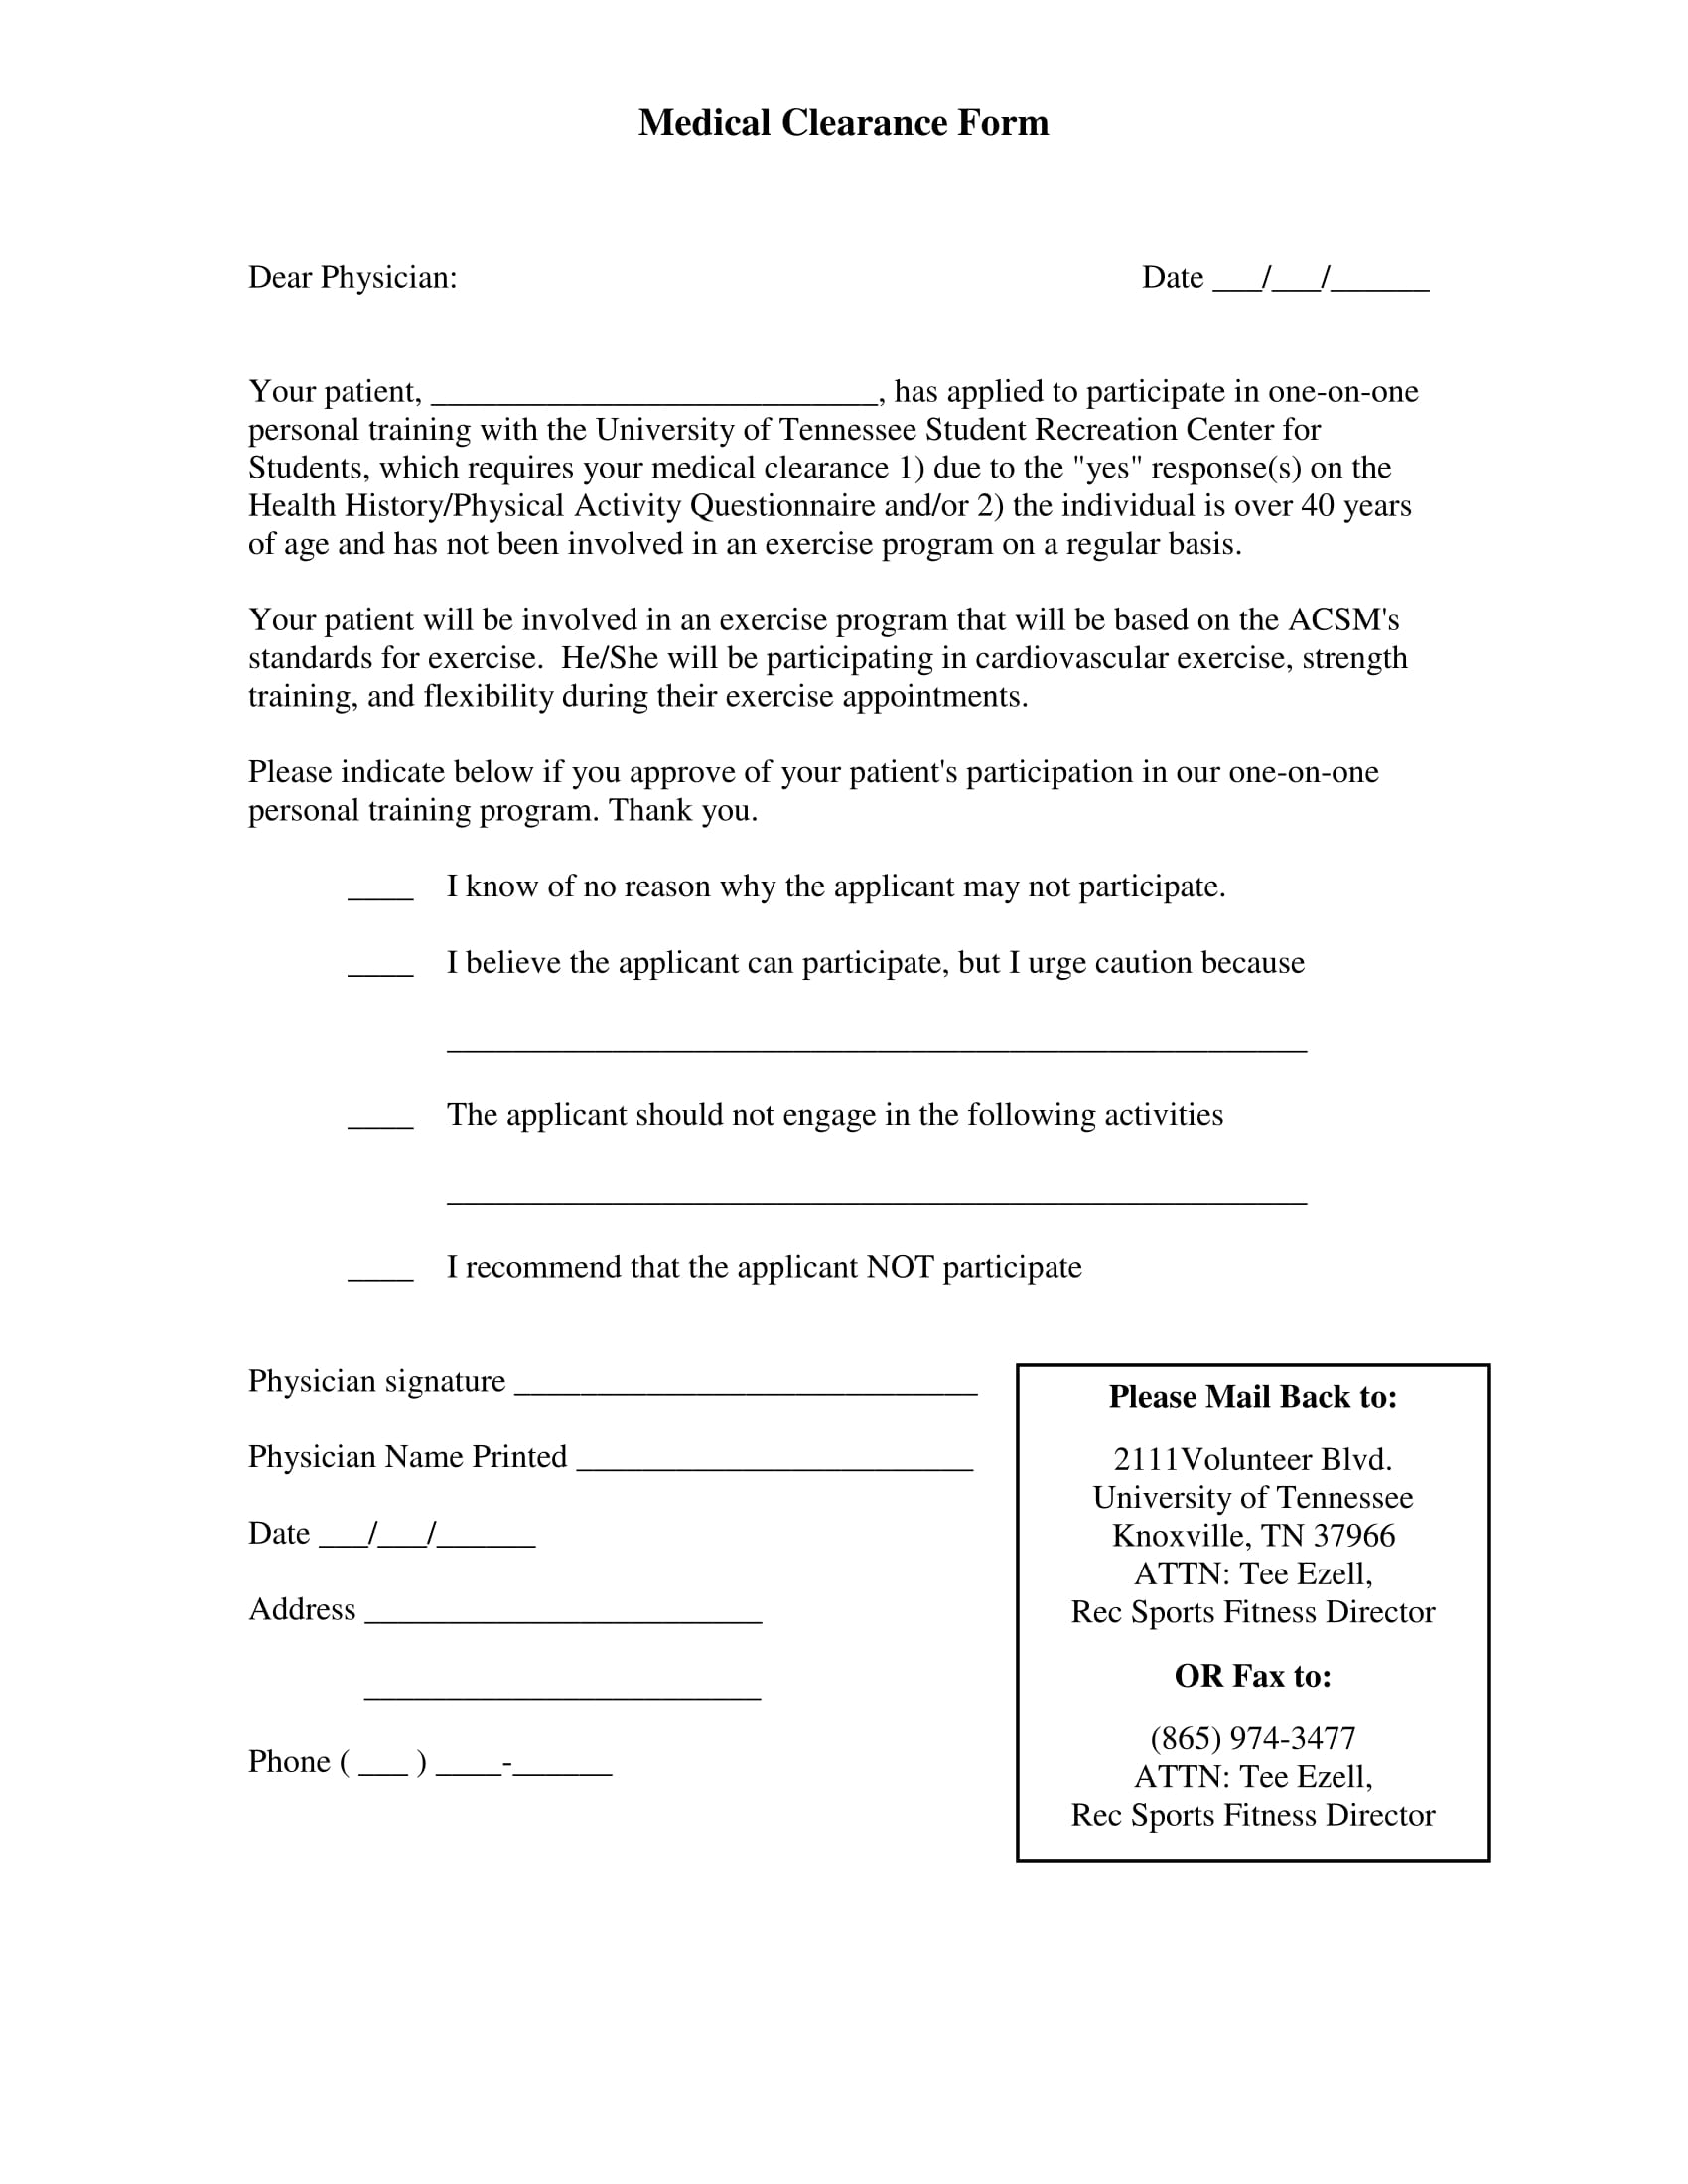 student recreation medical clearance form 1